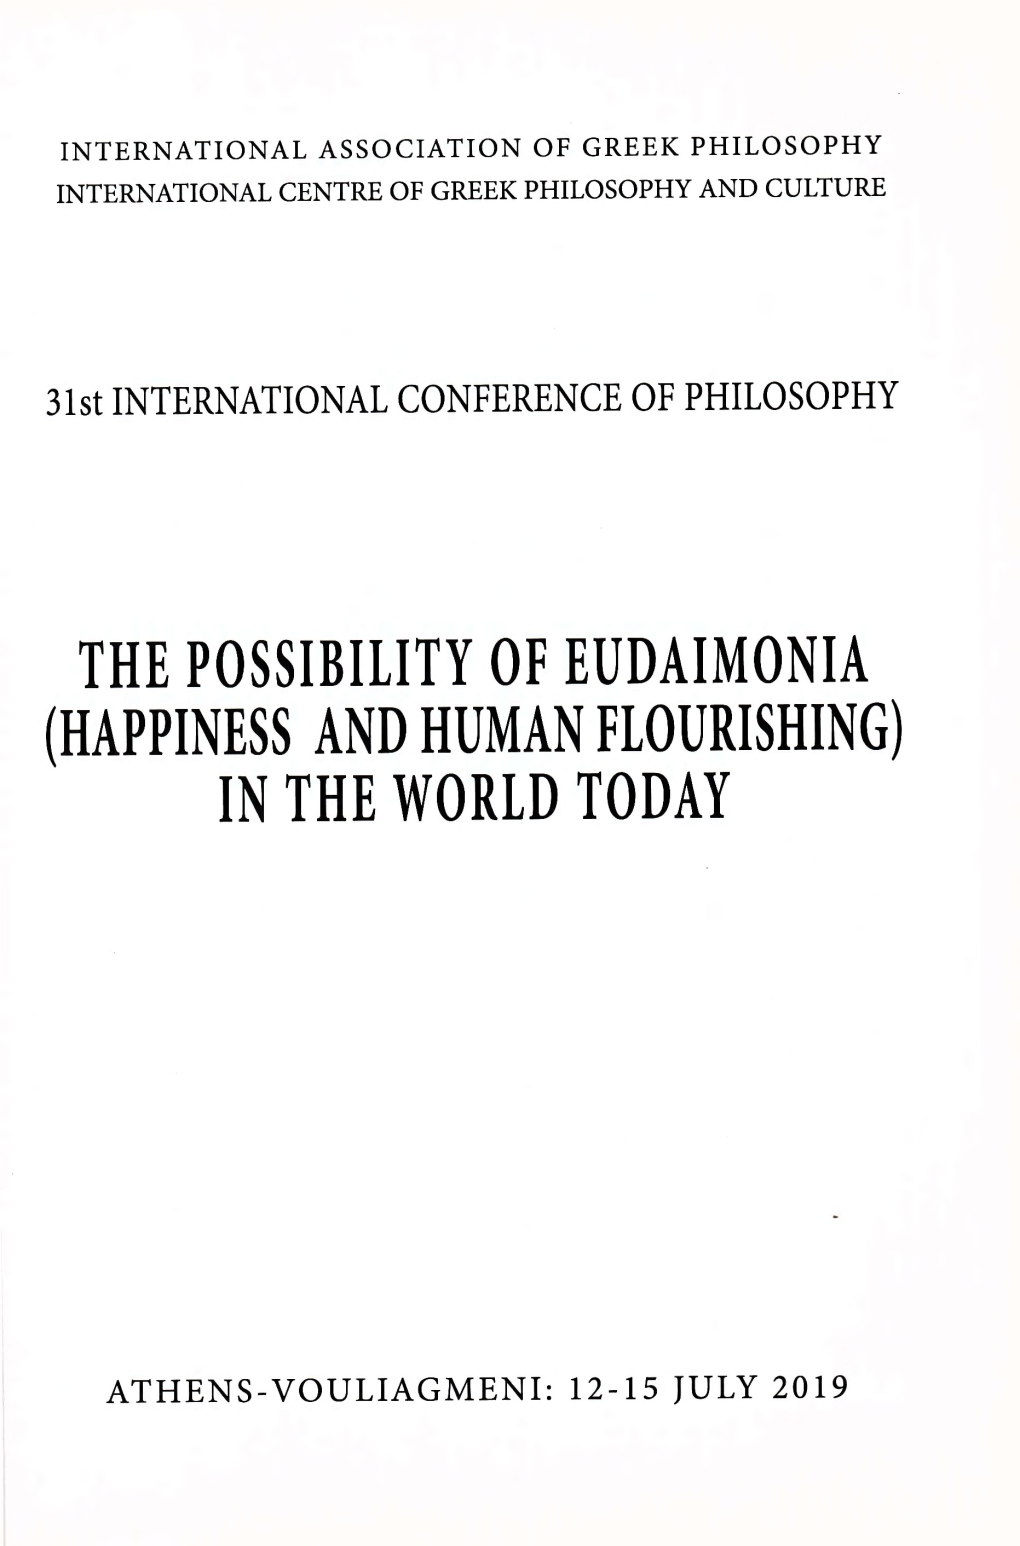 The Possibility of Eudaimonia (Happiness and Human Flourishing) in the World Today